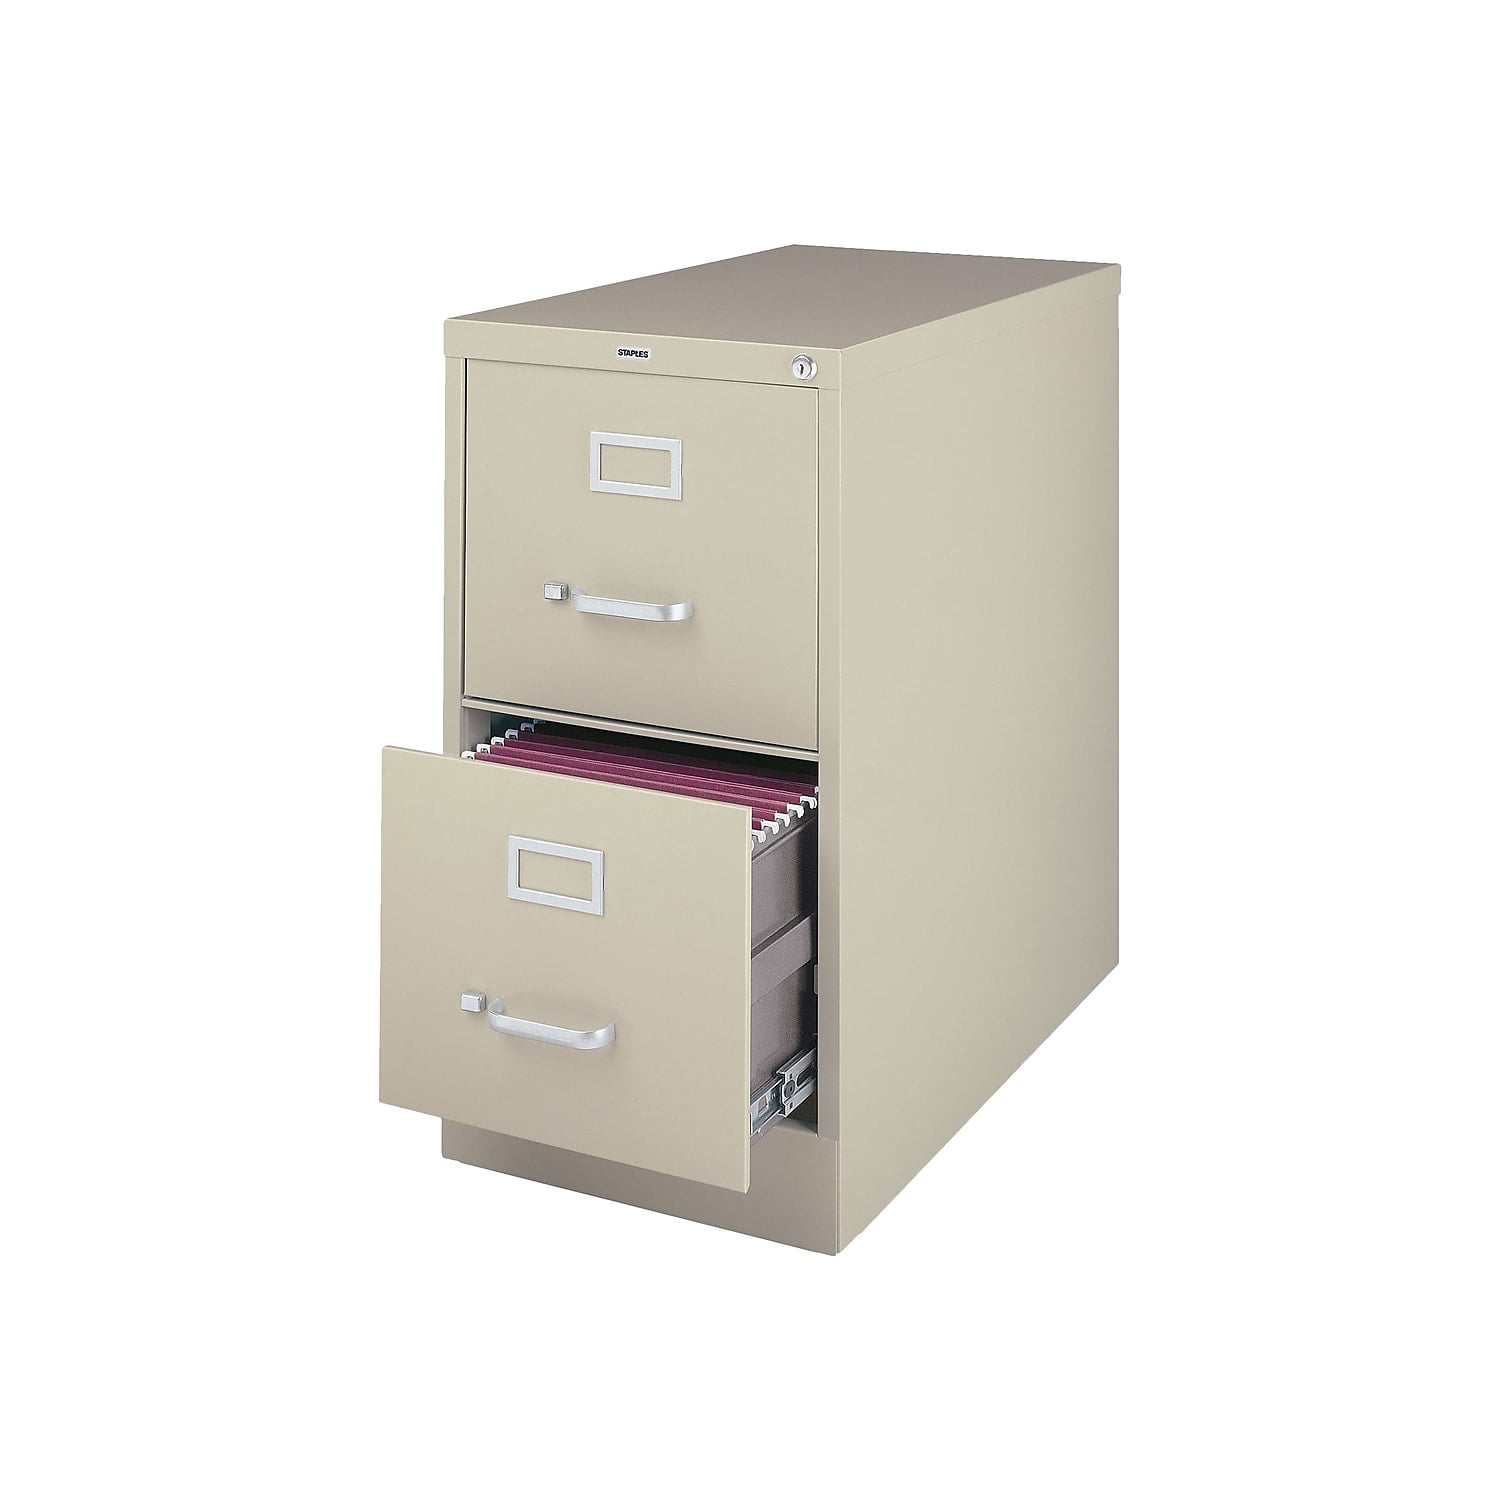 4 Drawers 15.25 x 14.00 x 14.50 Inches Details about   Vaultz Locking CD File Cabinet Black 